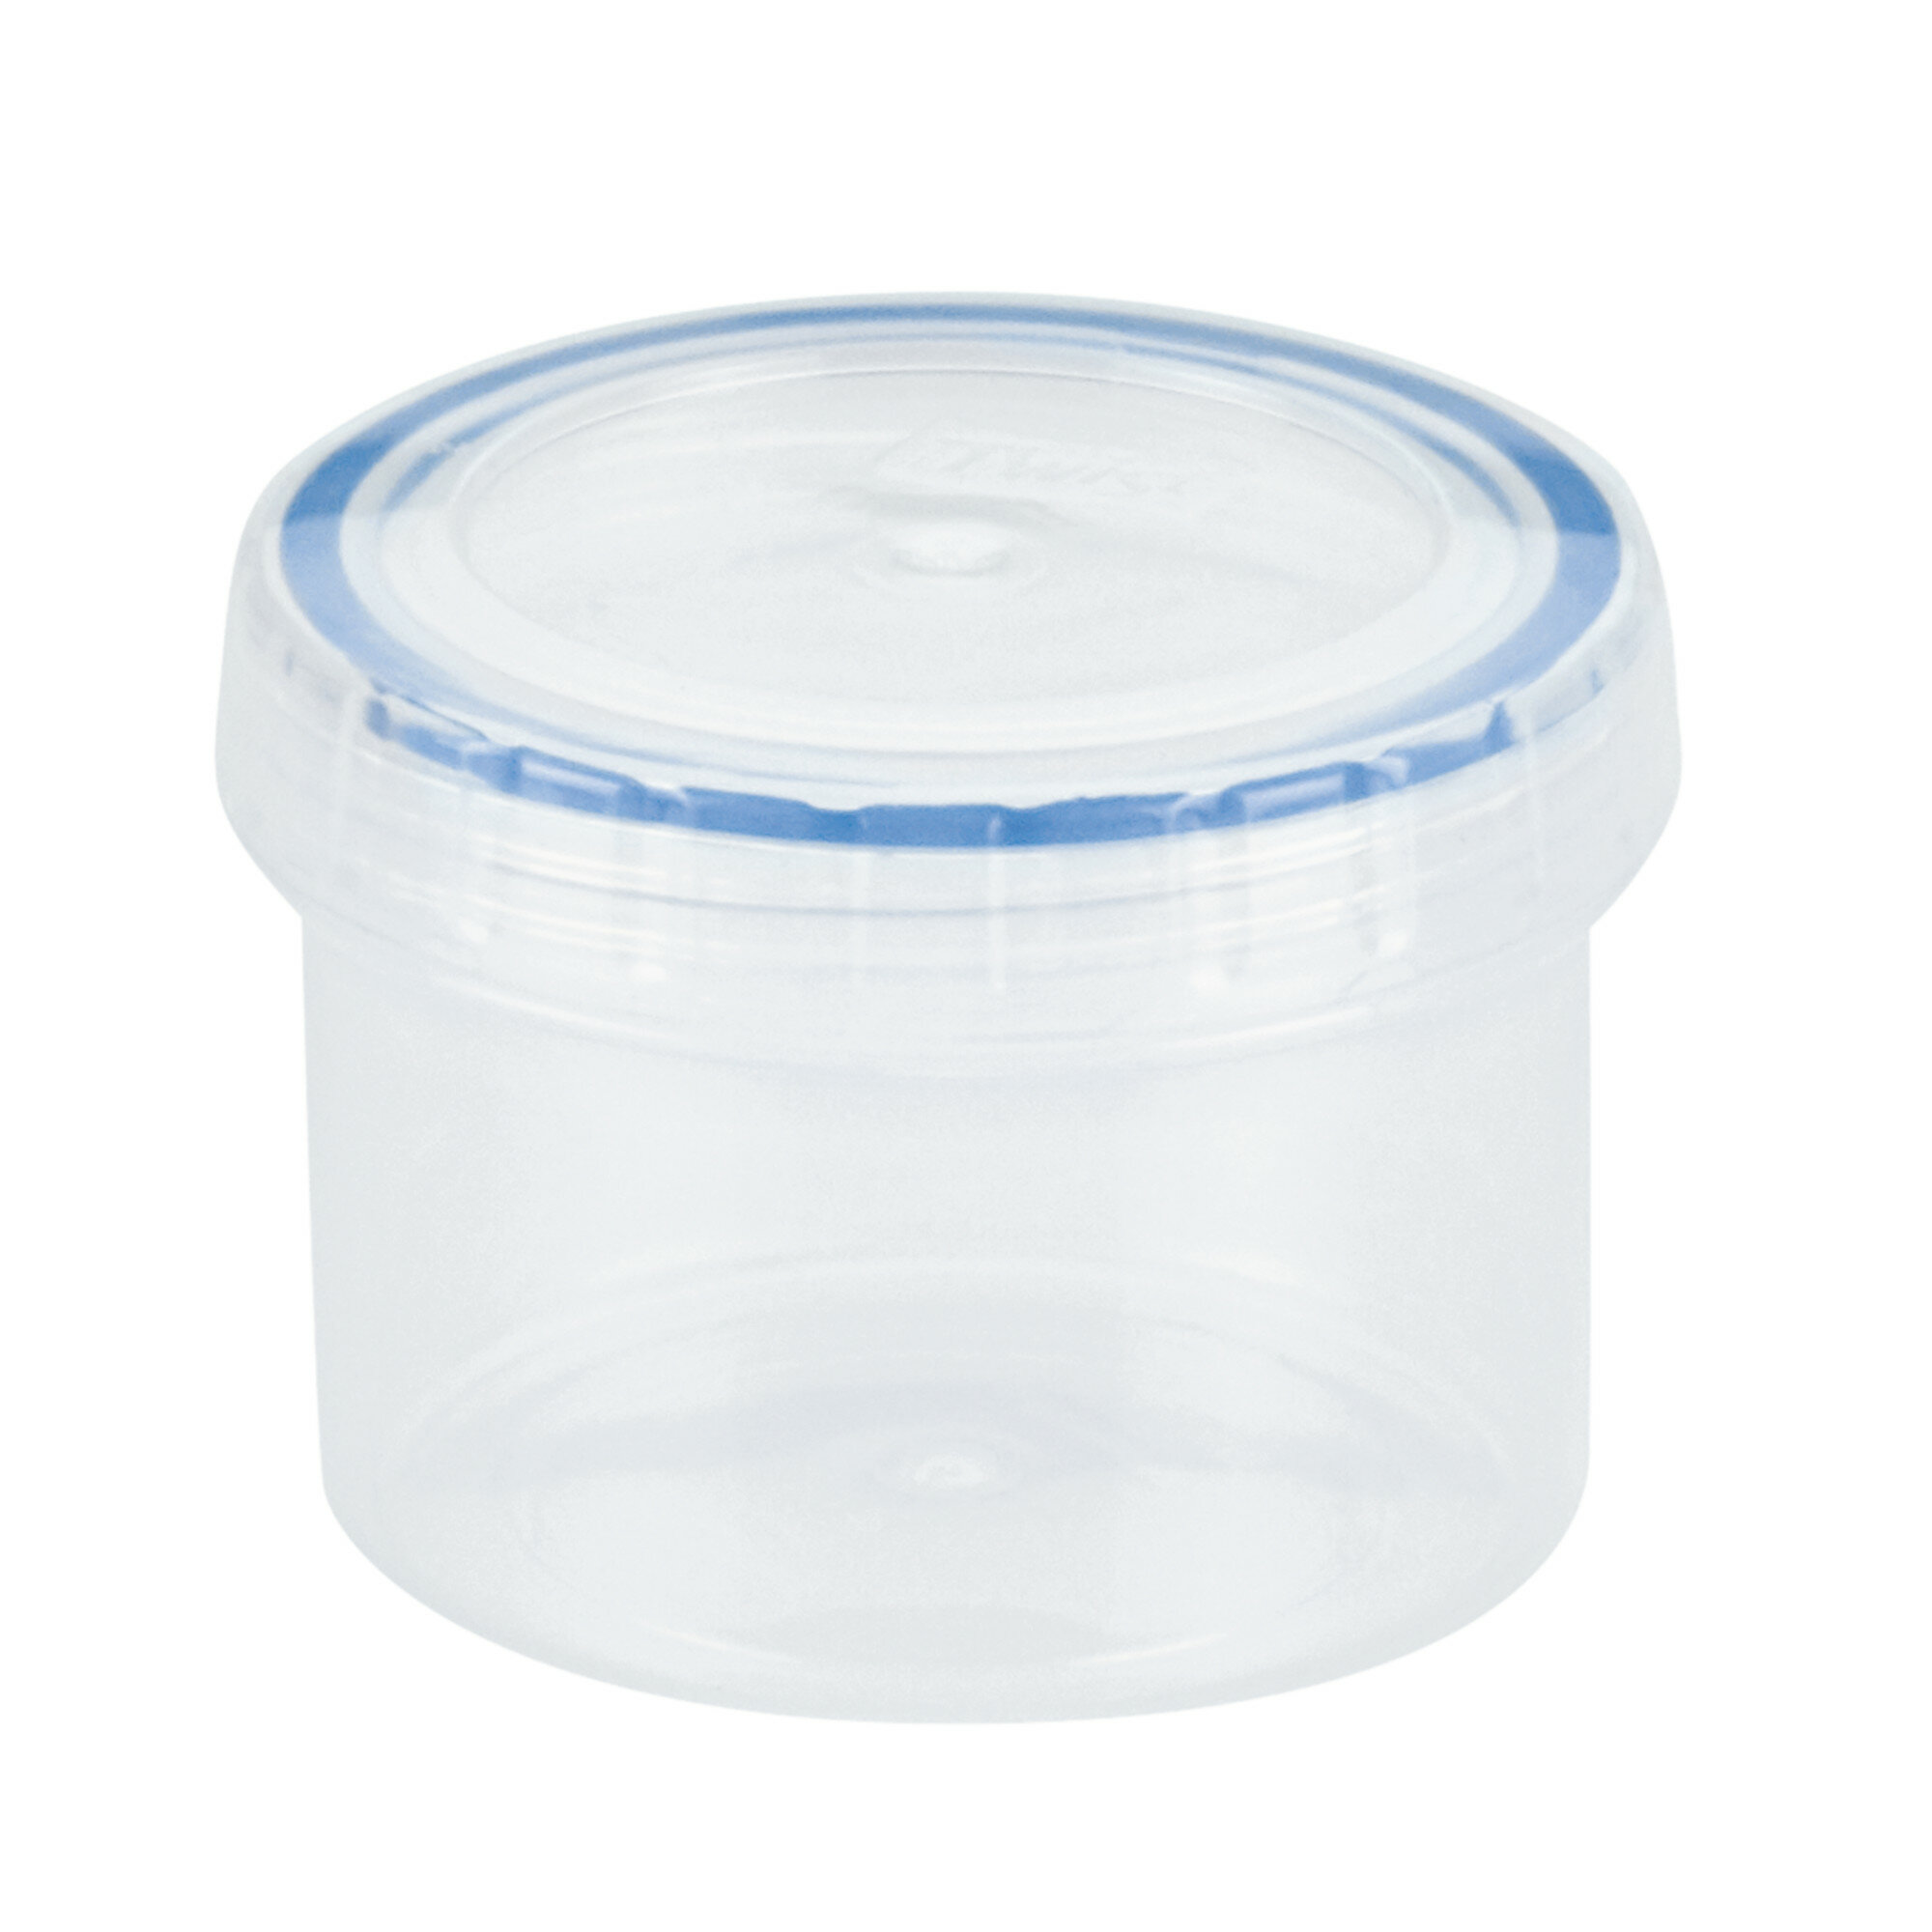 Best Deal for Soup Freezer Storage Containers With Twist Top lids [32 Oz